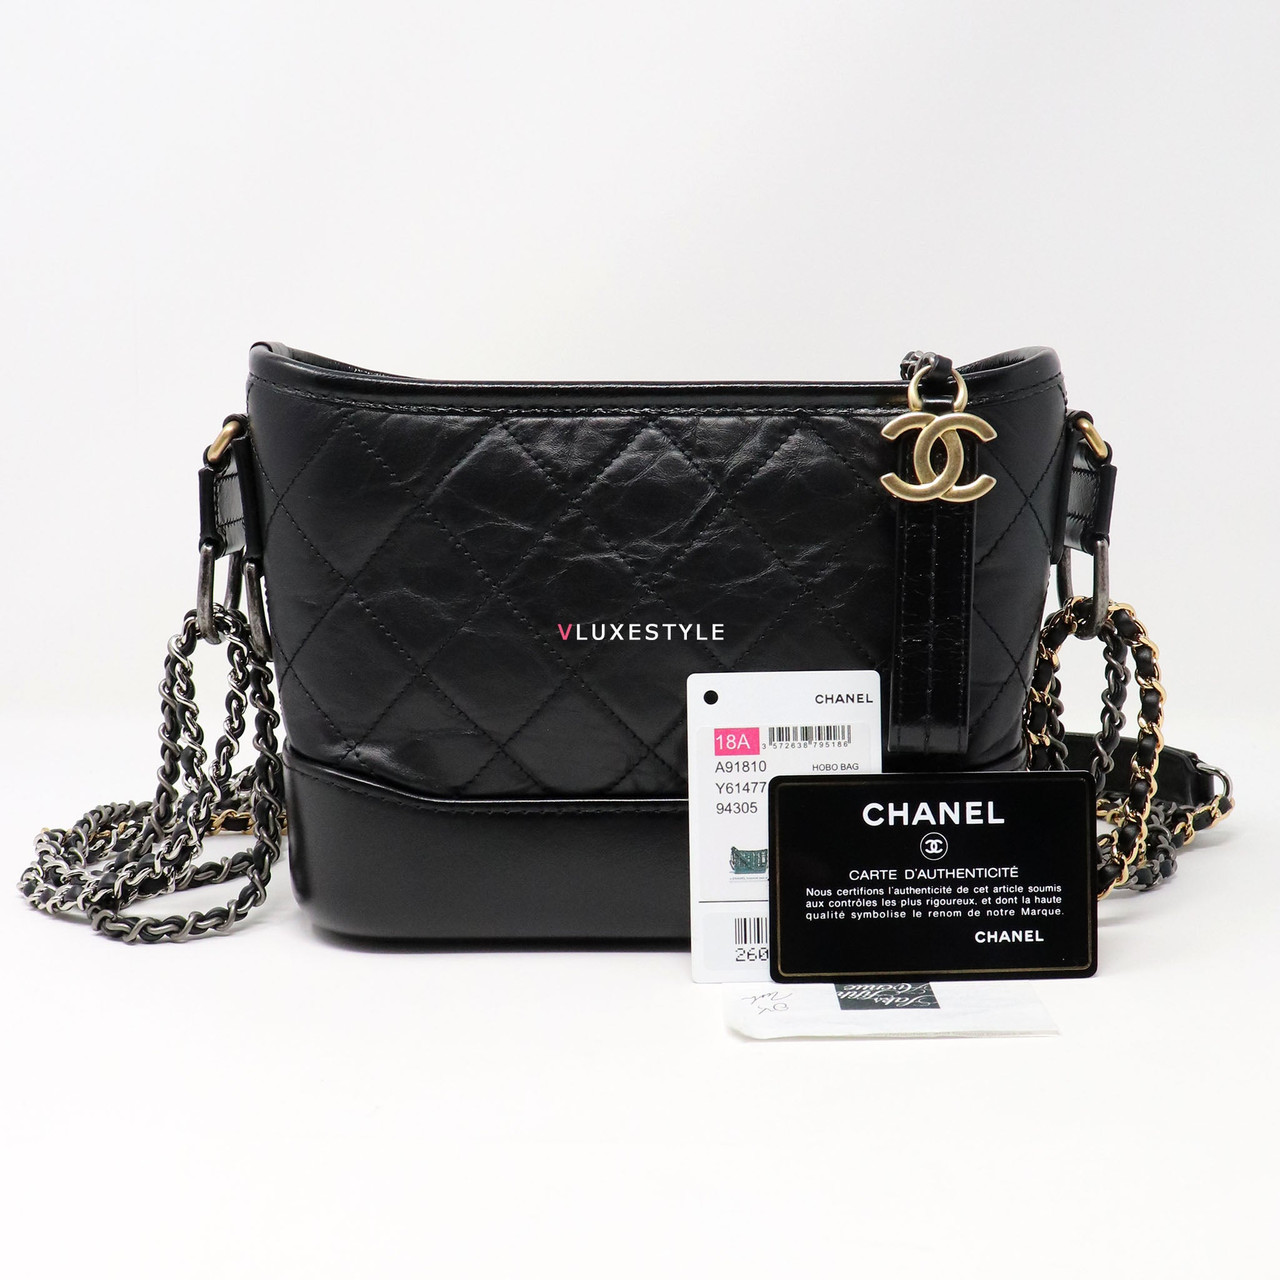 Chanel 18A Small Gabrielle Hobo Black Quilted Aged Calfskin